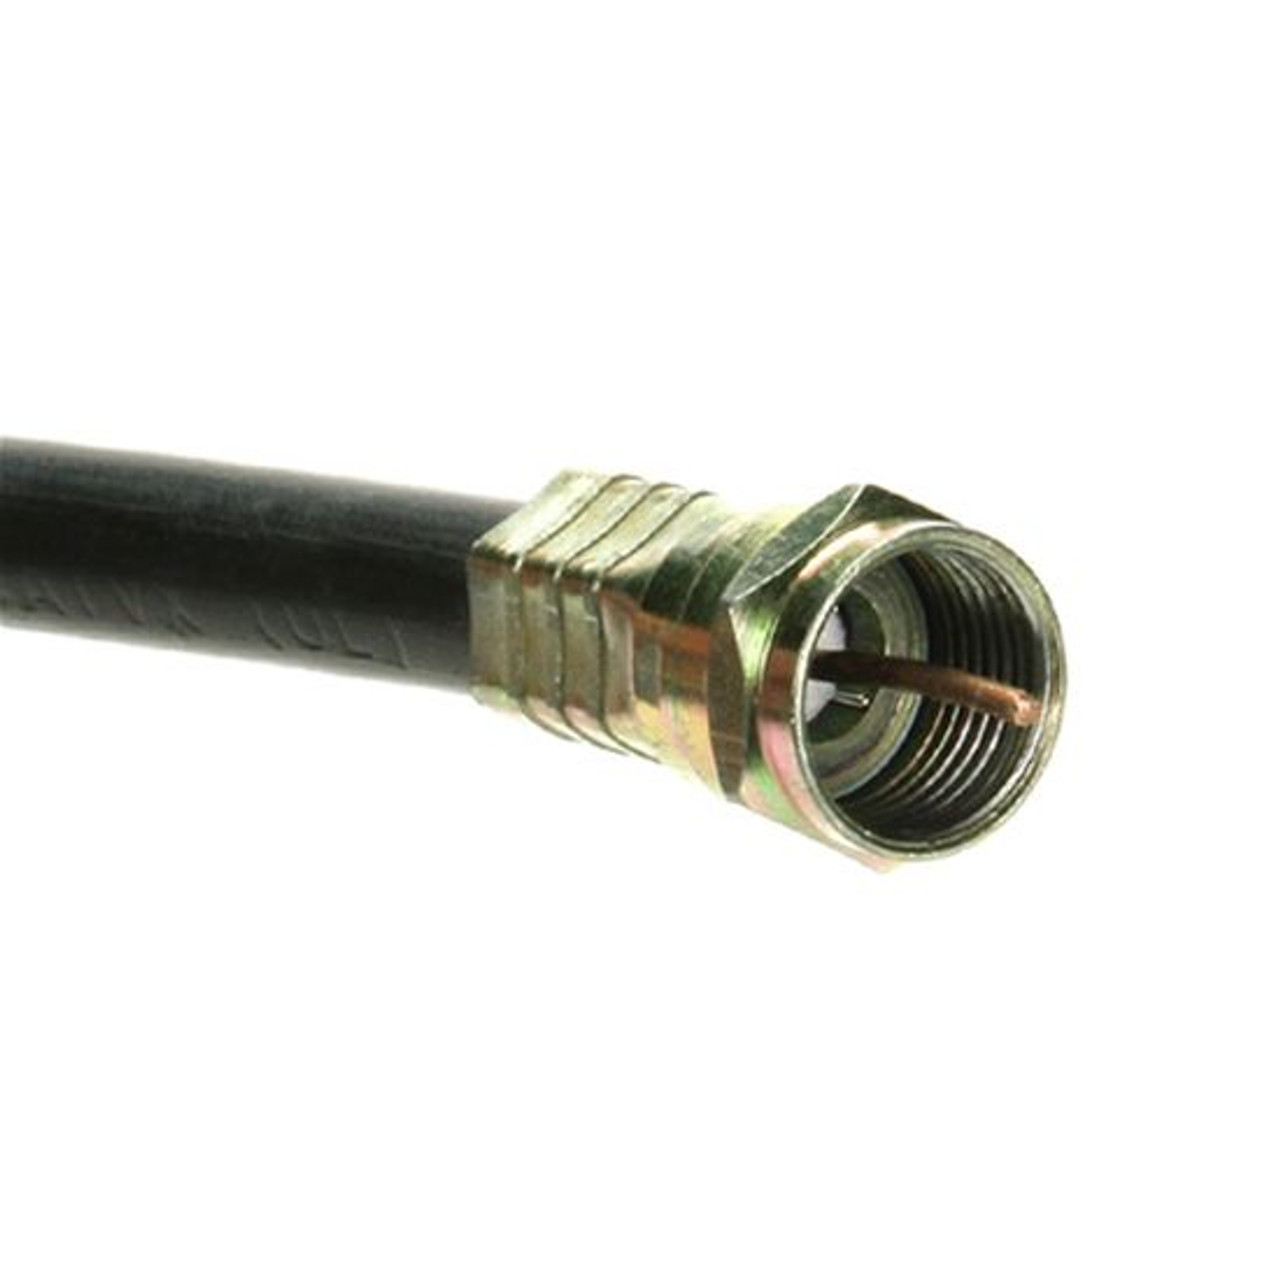 Steren 215-306BK 6' FT RG6 Quad Coax Cable 3 GHz Black Shielded with Installed F-Type Connectors RG-6 Digital HD Satellite Video Coax Cable Jumper 75 Ohm HDTV Signal Distribution Line, Part # 215306-BK